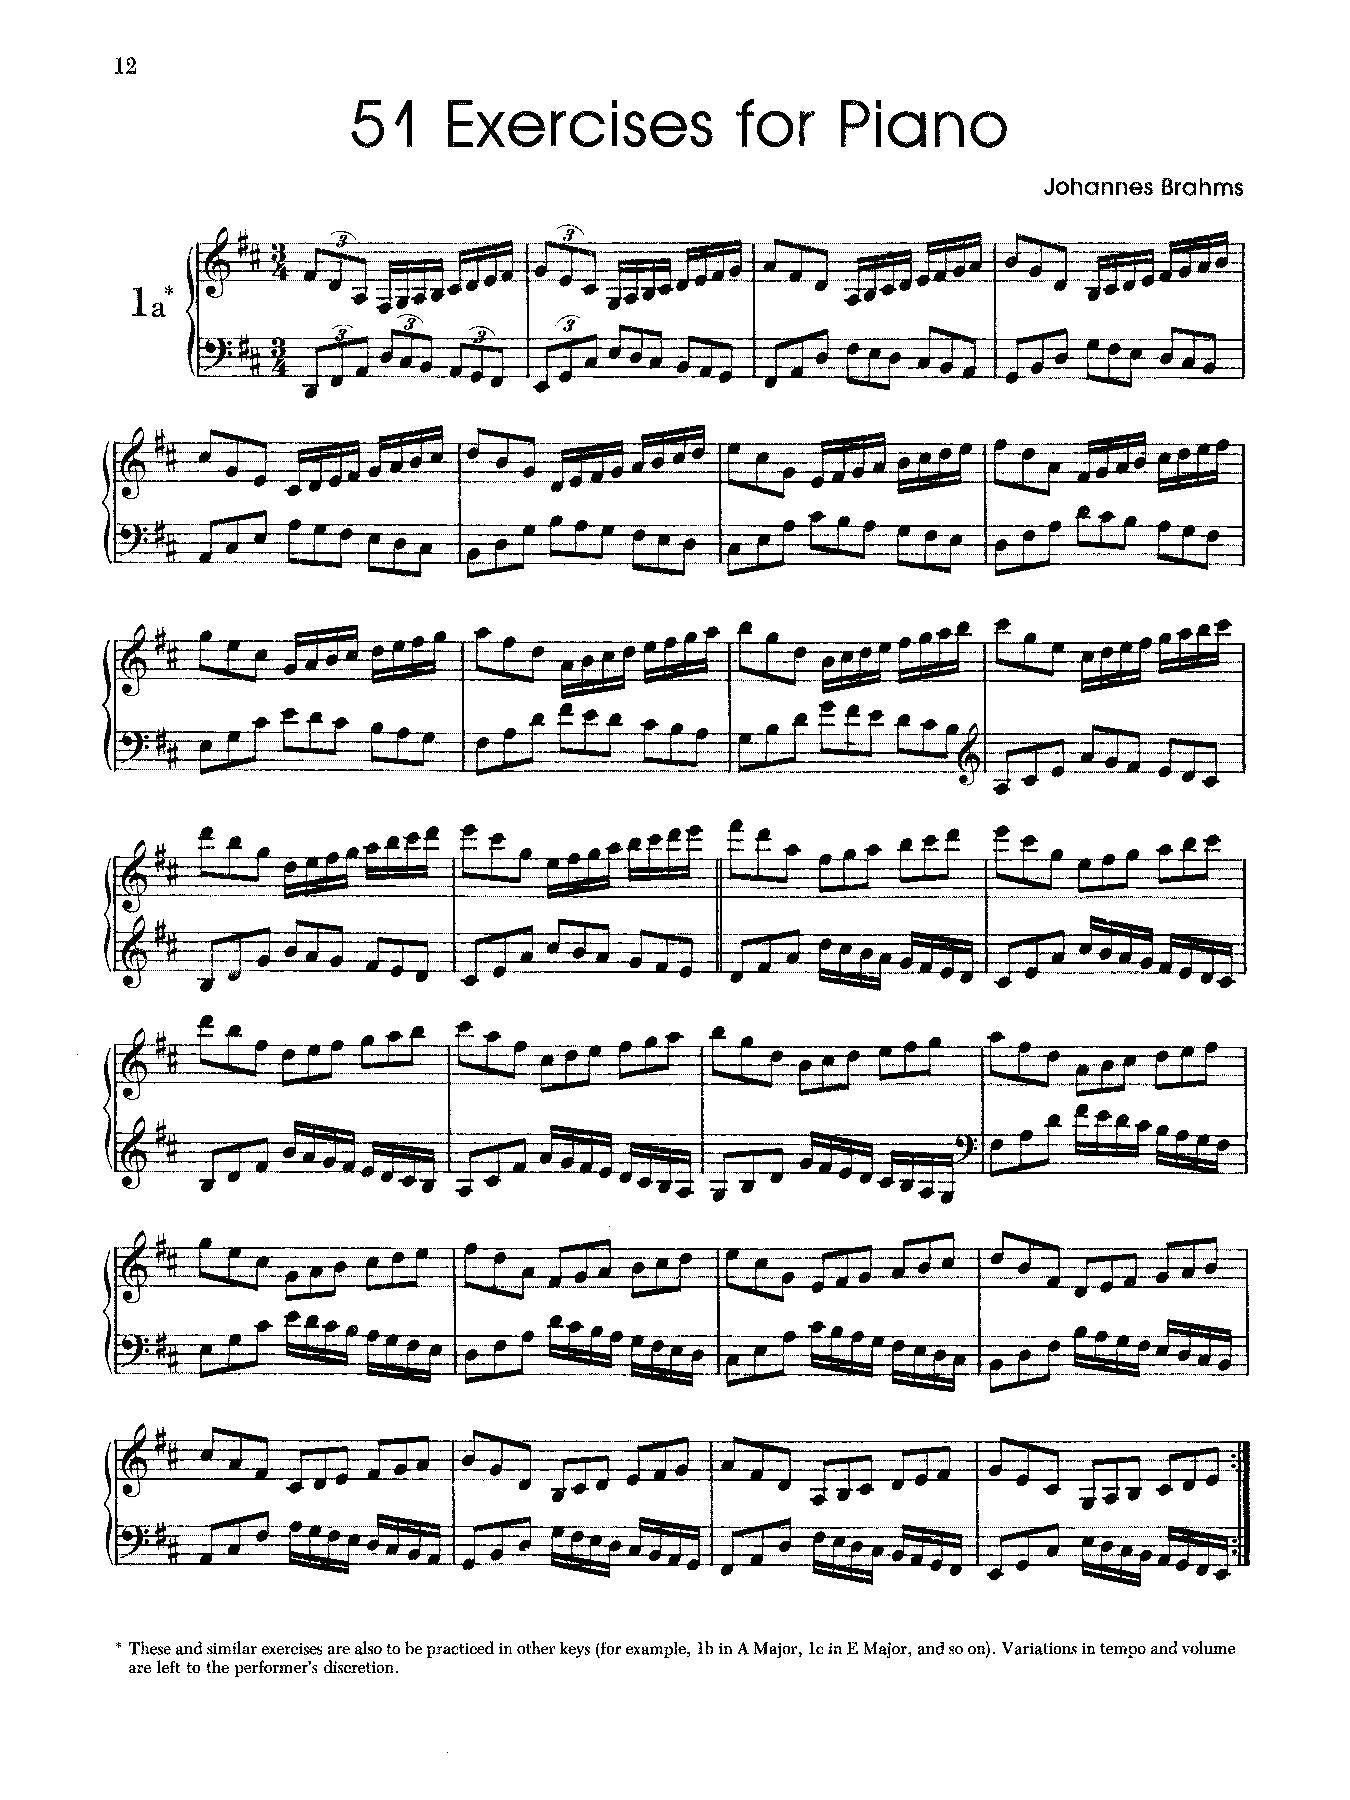 Brahms: 51 Exercises for Piano Solo